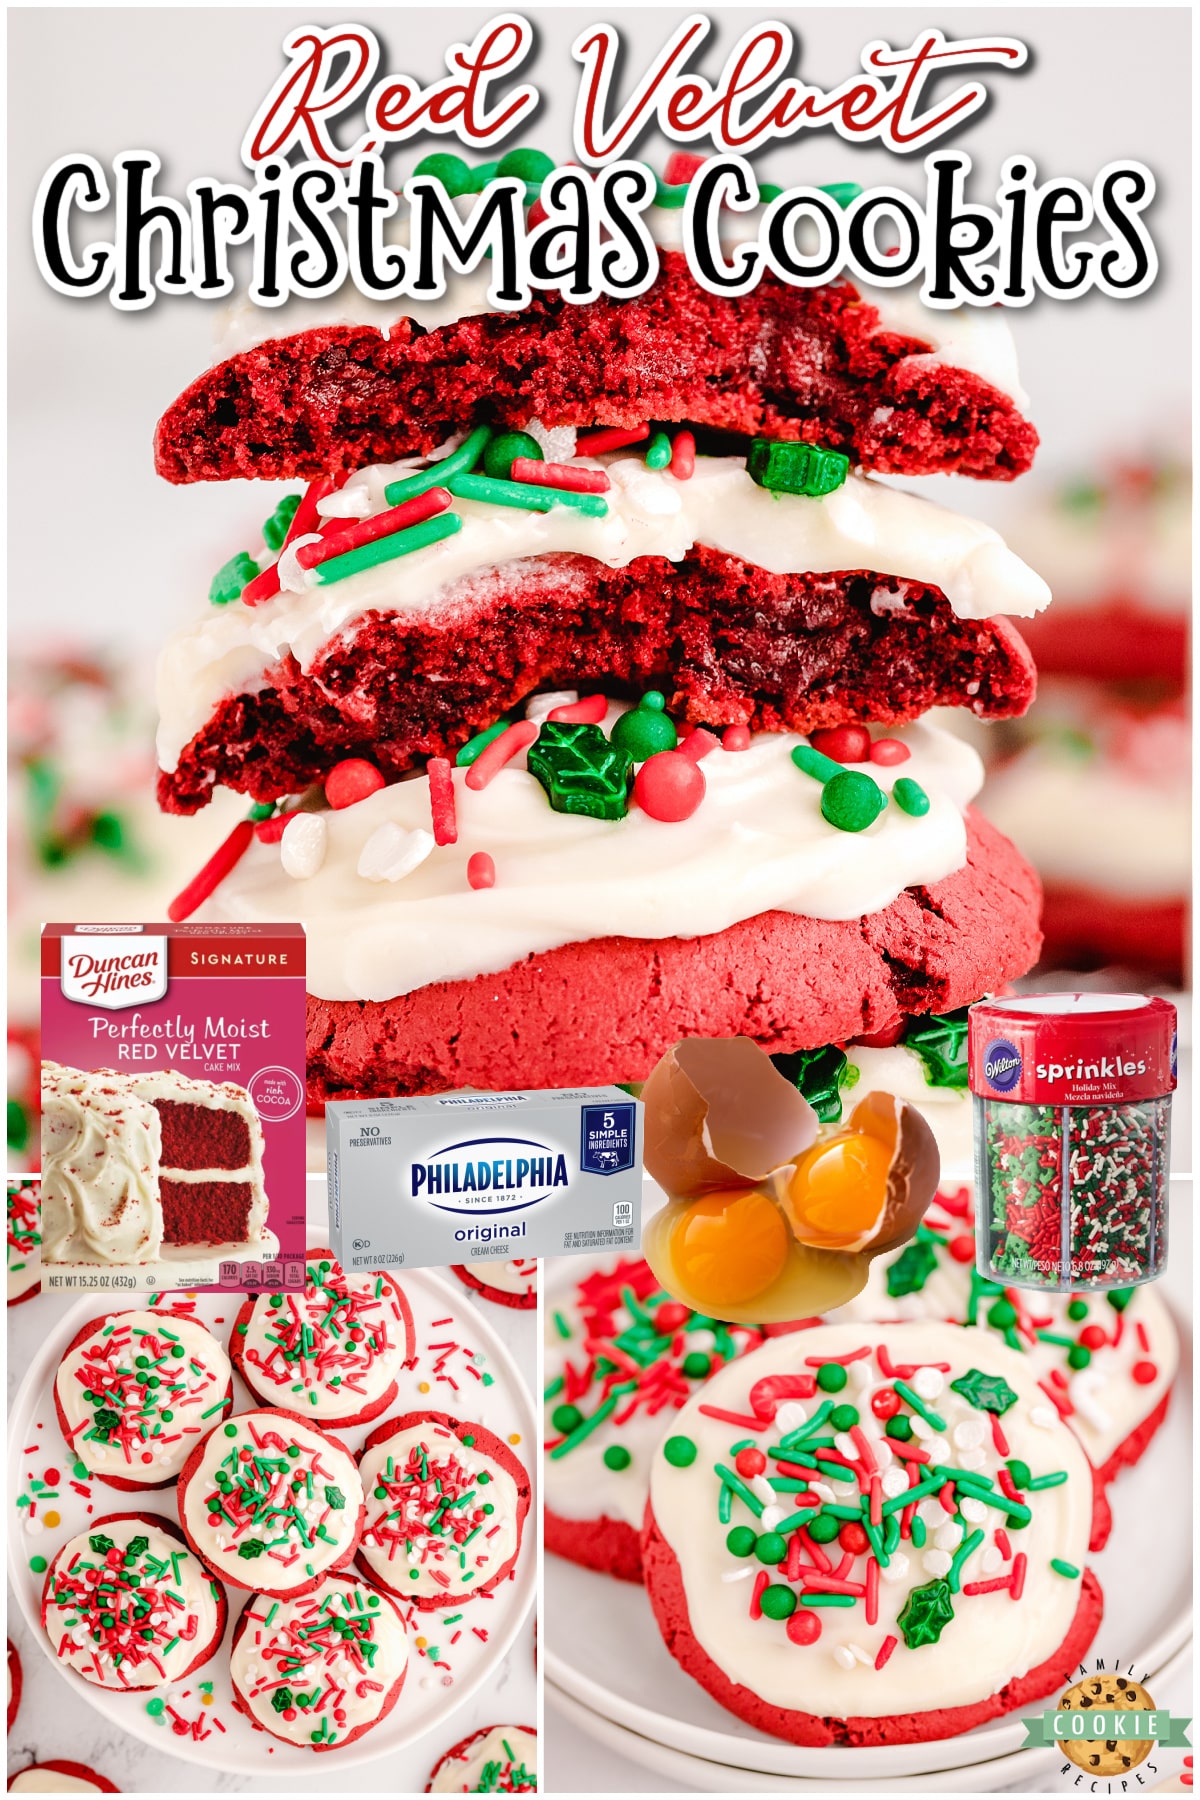 Red Velvet Christmas cookies with the festive red color, rich chocolate taste & cream cheese icing on top, these cookies are sure to be holiday favorites!